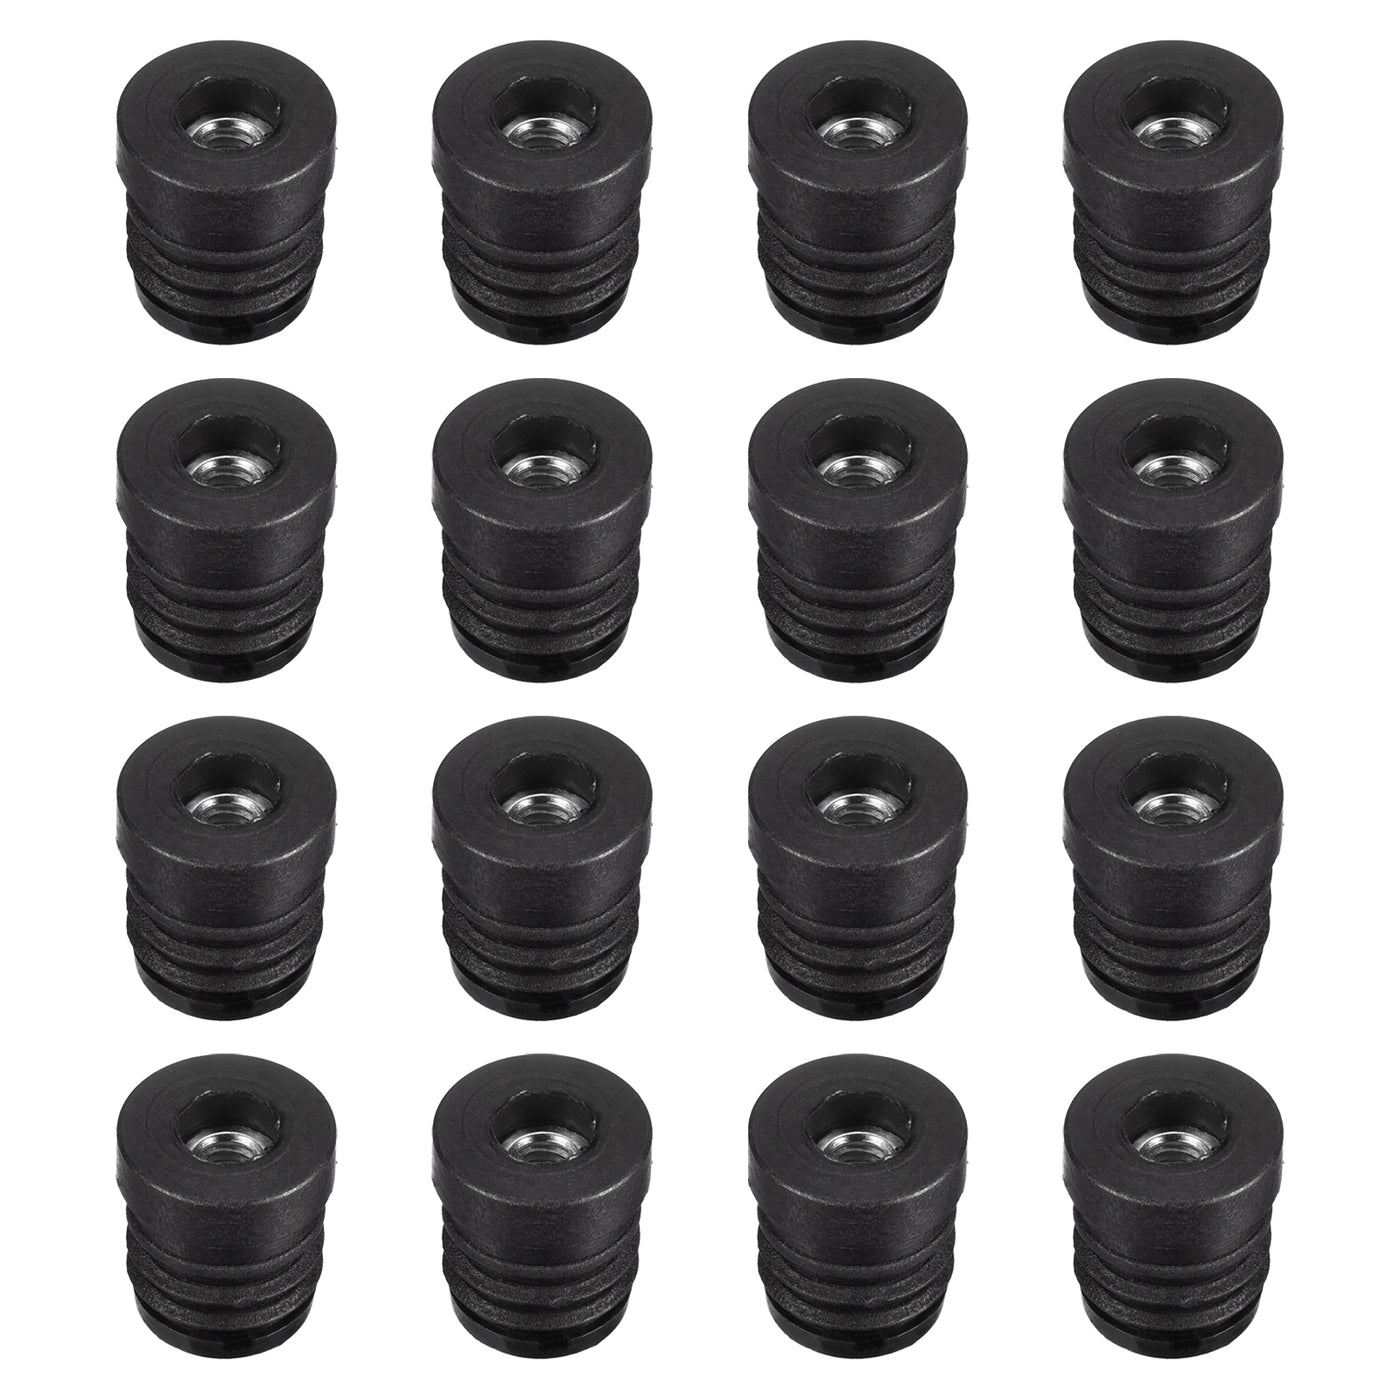 uxcell Uxcell 24Pcs 19mm/0.75" Caster Insert with Thread, Round M6 Thread for Furniture